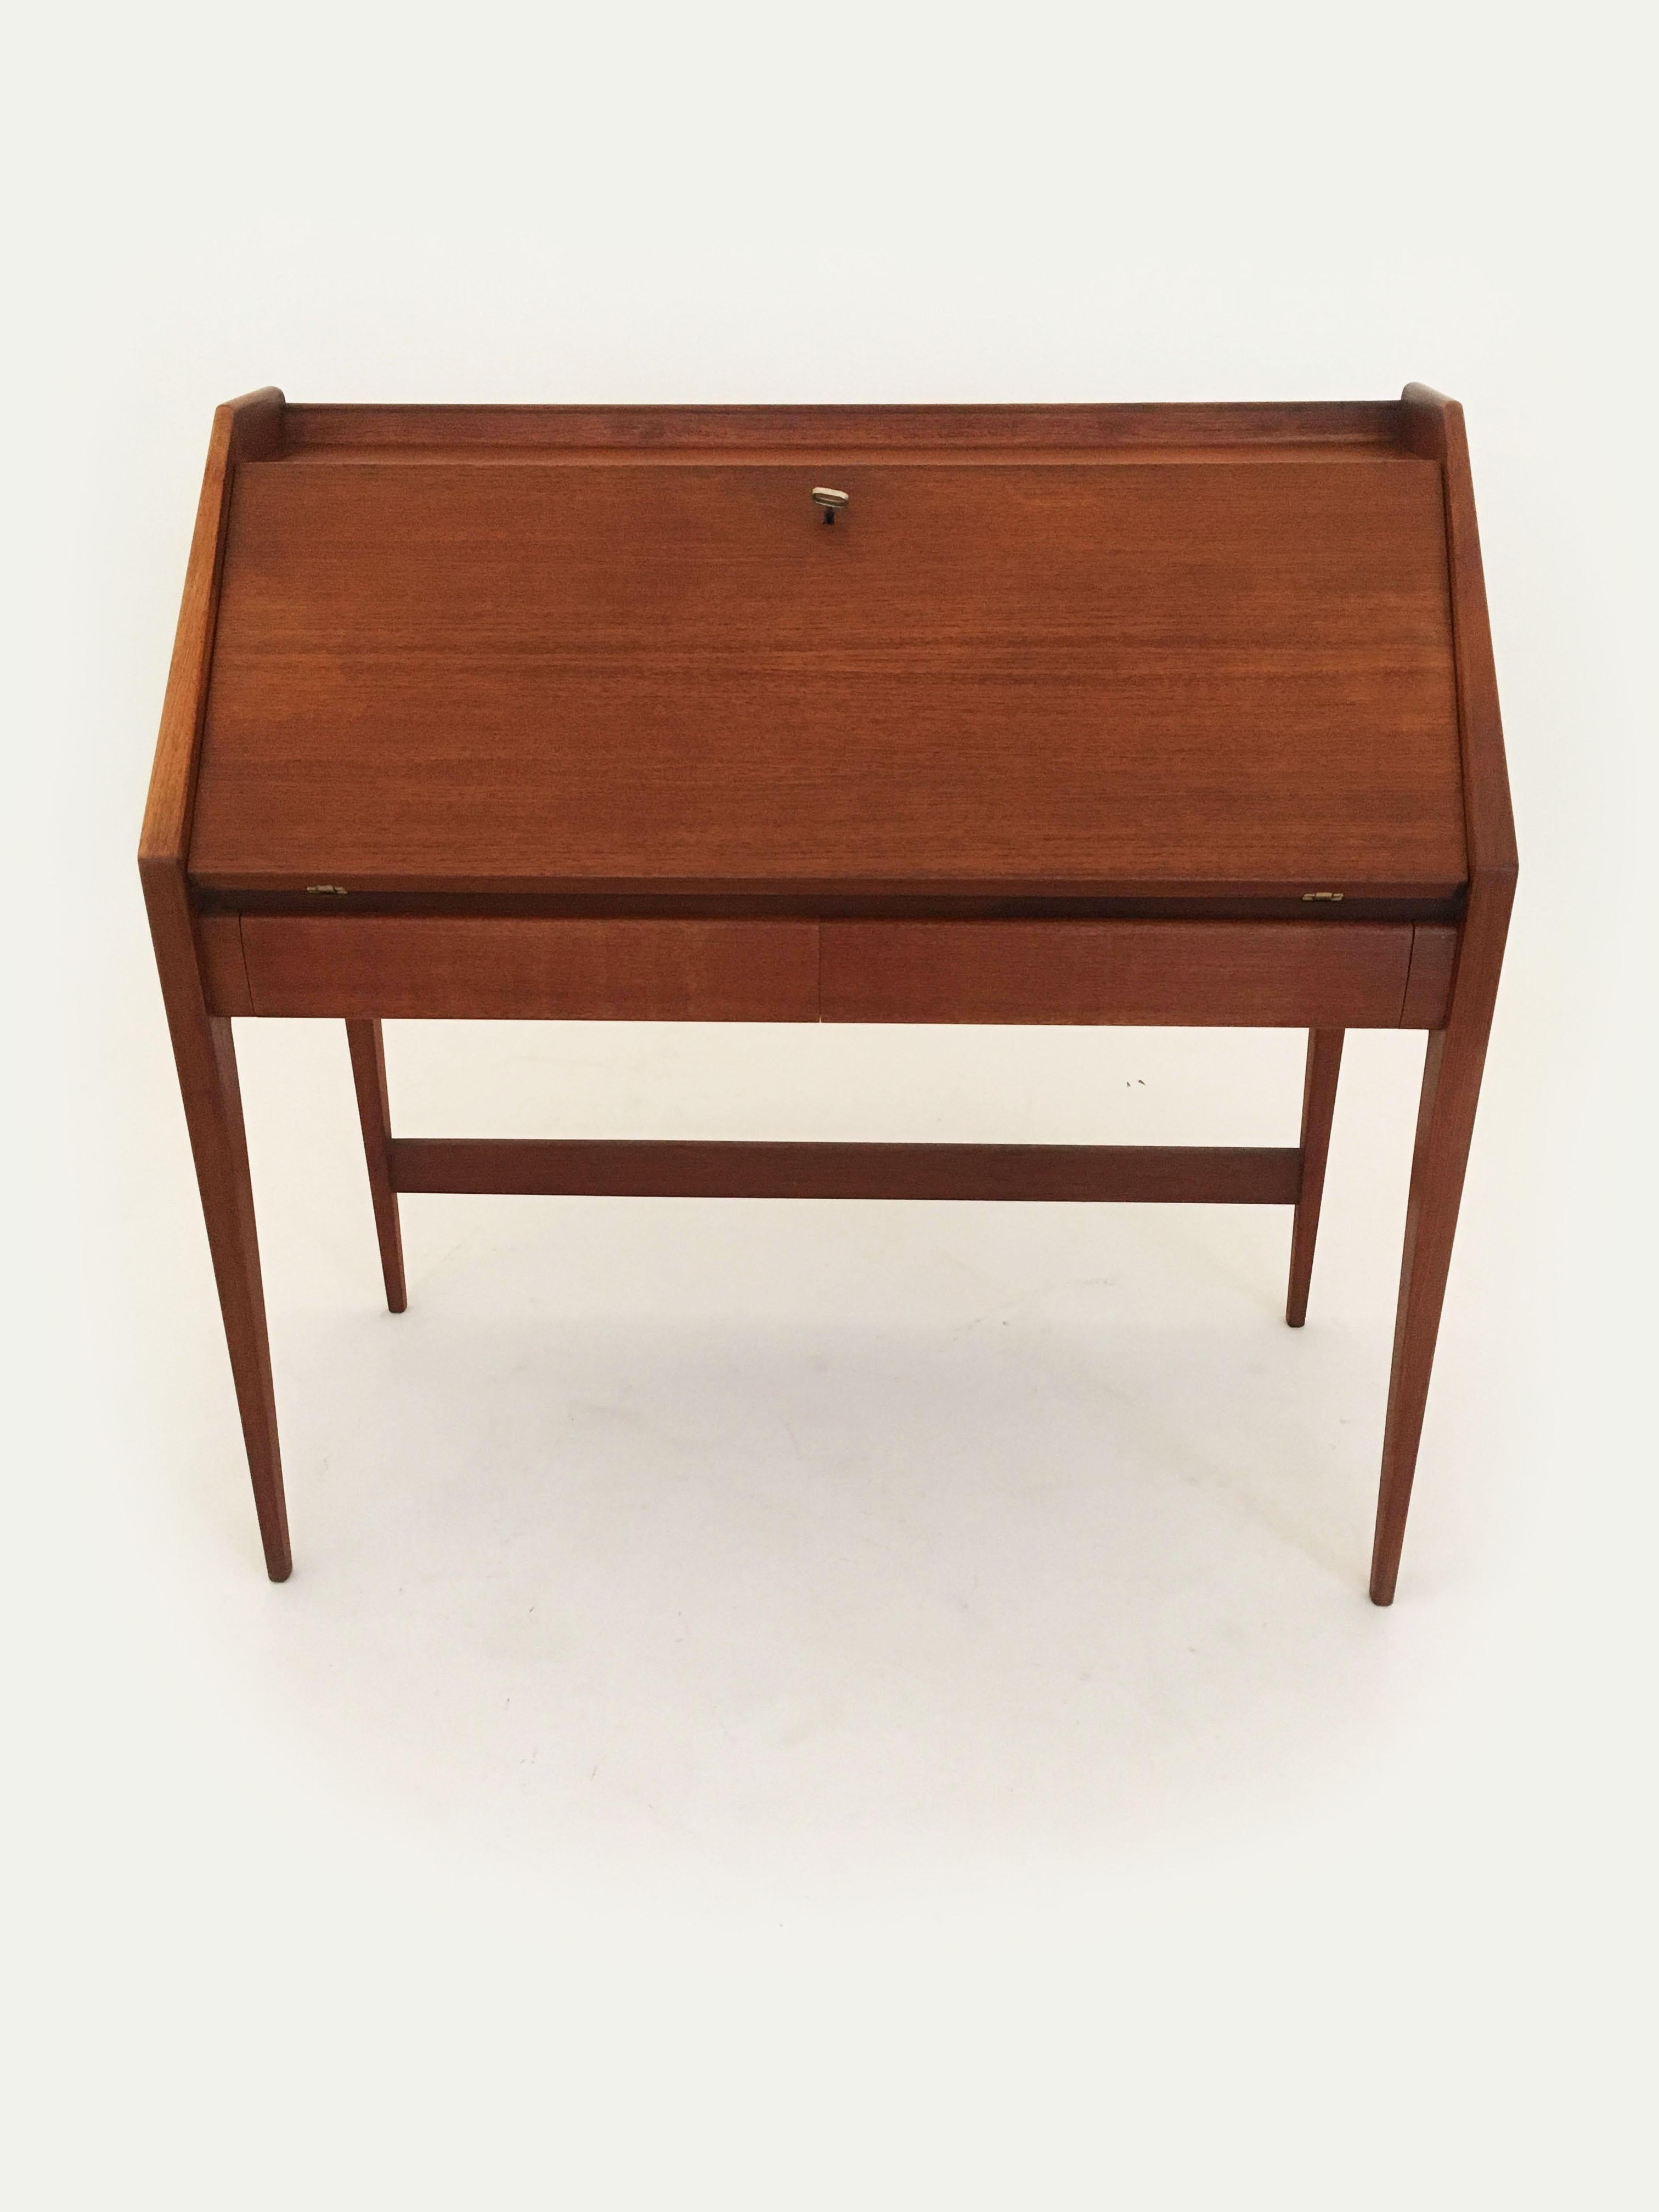 A rare vintage writing desk secretary in teak, designed by Walter Wirtz and manufactured by Wilhem Renz, Germany, 1960s. The quality and design is superb: an internal spring mechanism opens up with the turn of the key and two rail guards that